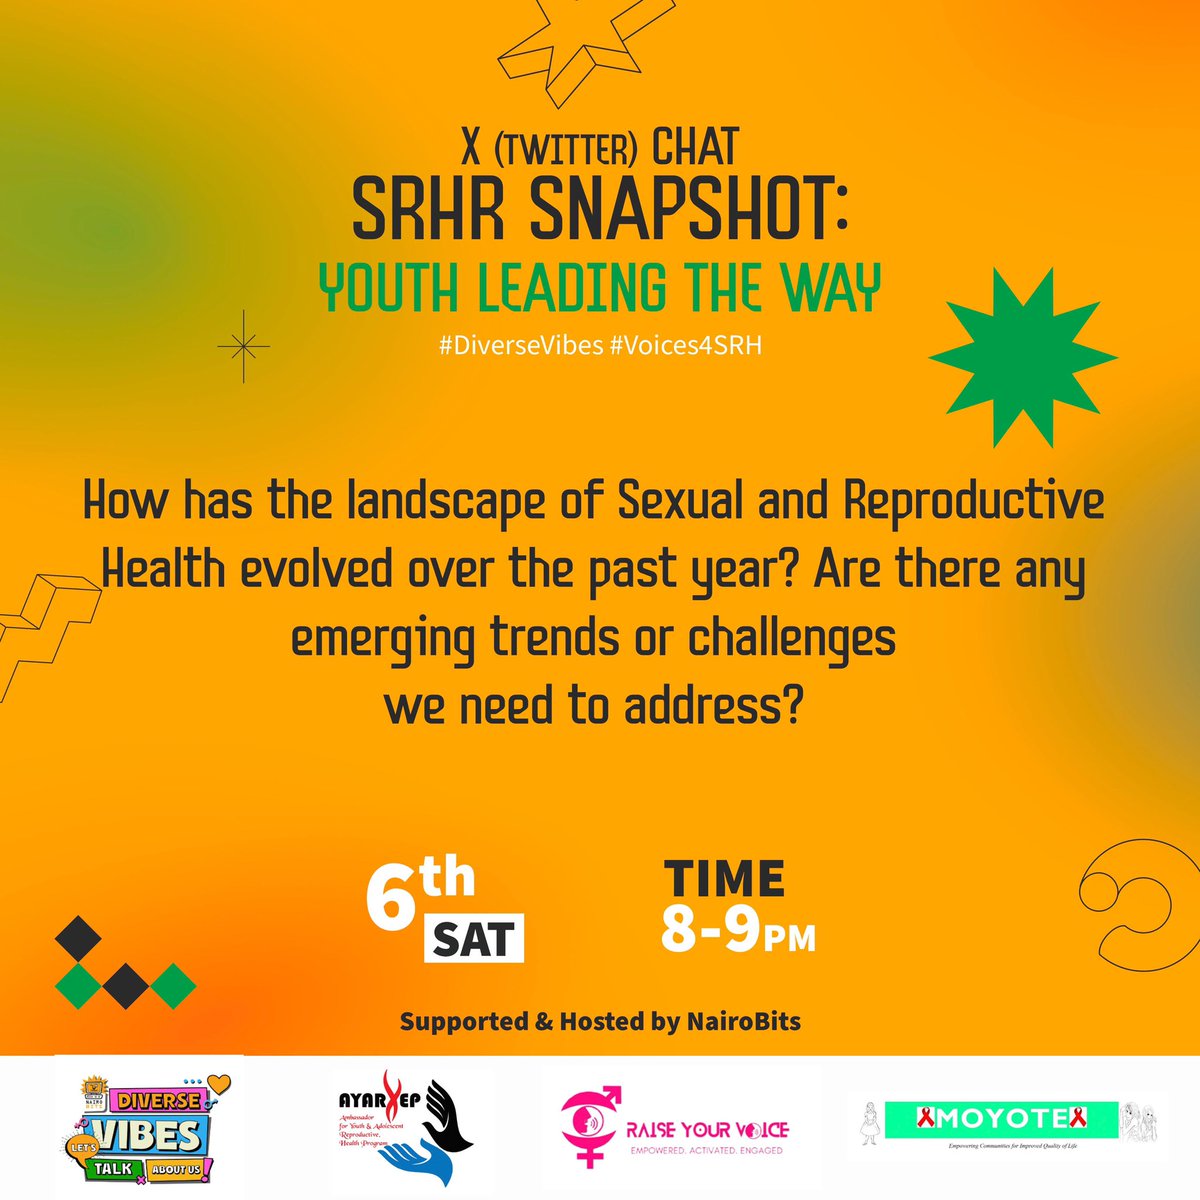 @Nairobits @MoyoteKenya @RHRNKenya @AYARHEP_KENYA Q 2 How has the landscape of Sexual and Reproductive Health evolved over the past year? Are there any emerging trends or challenges we need to address? #Voices4SRH #DiverseVibes @Nairobits @MoyoteKenya @RHRNKenya @AYARHEP_KENYA